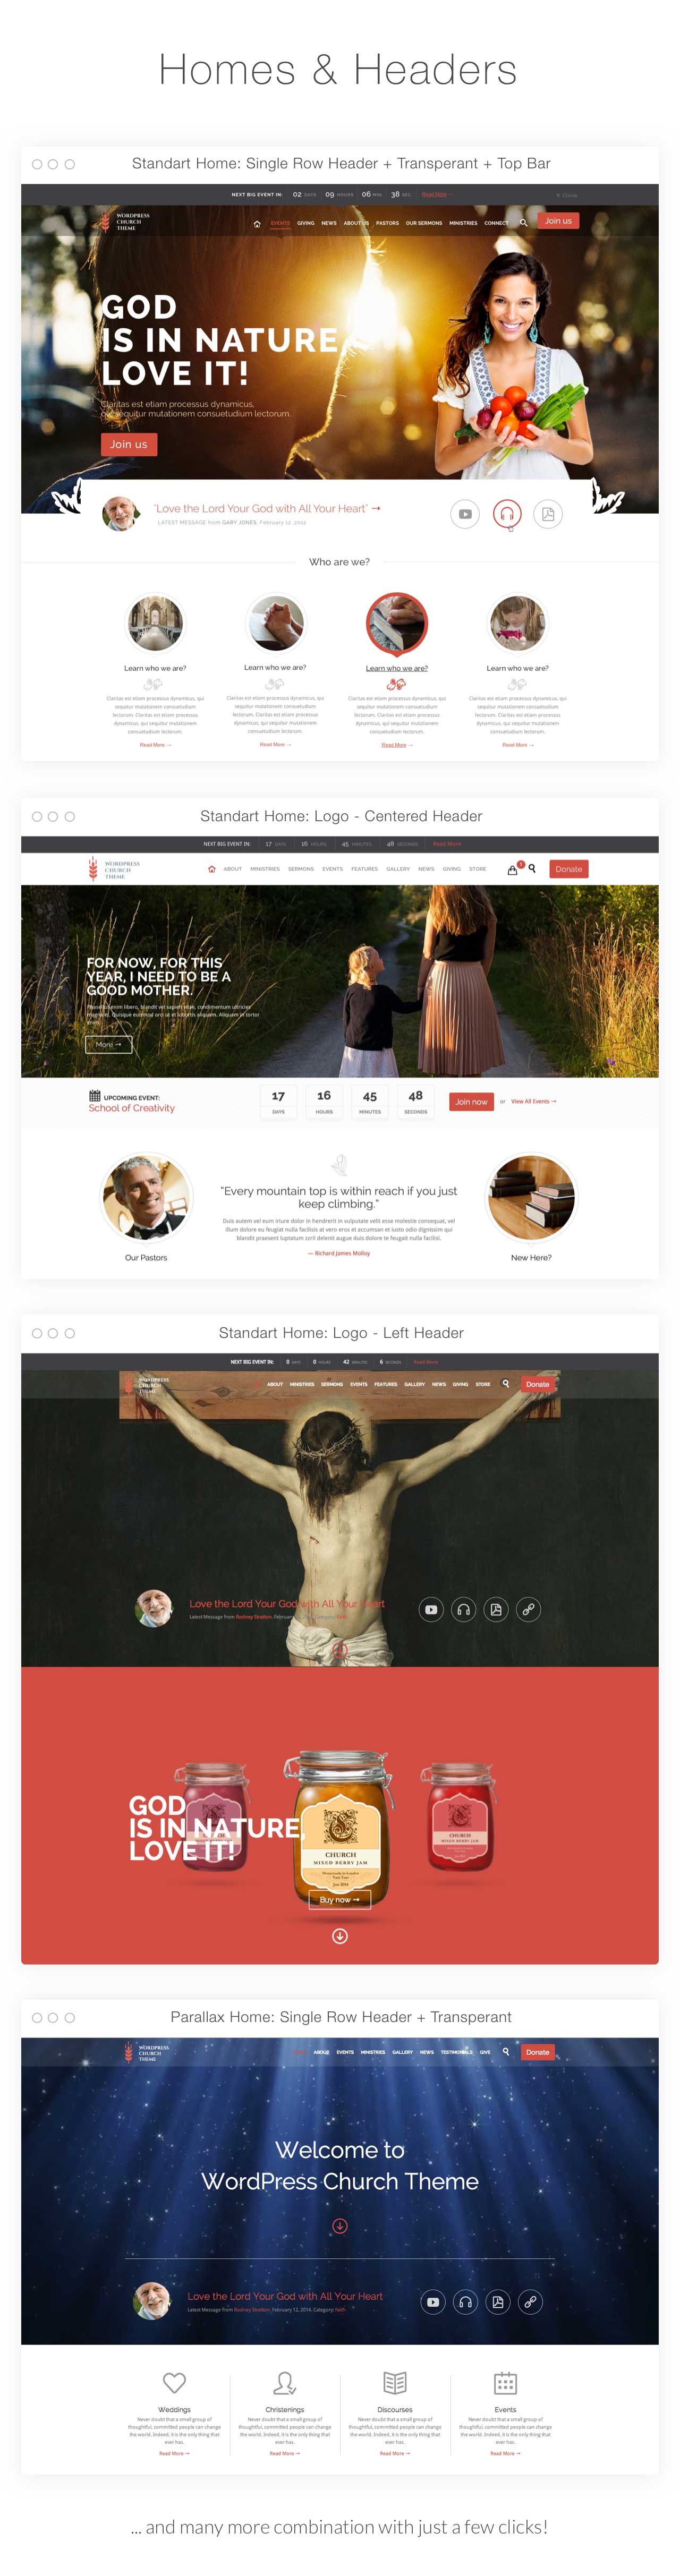 A lot of different homes and headers of church WordPress theme.